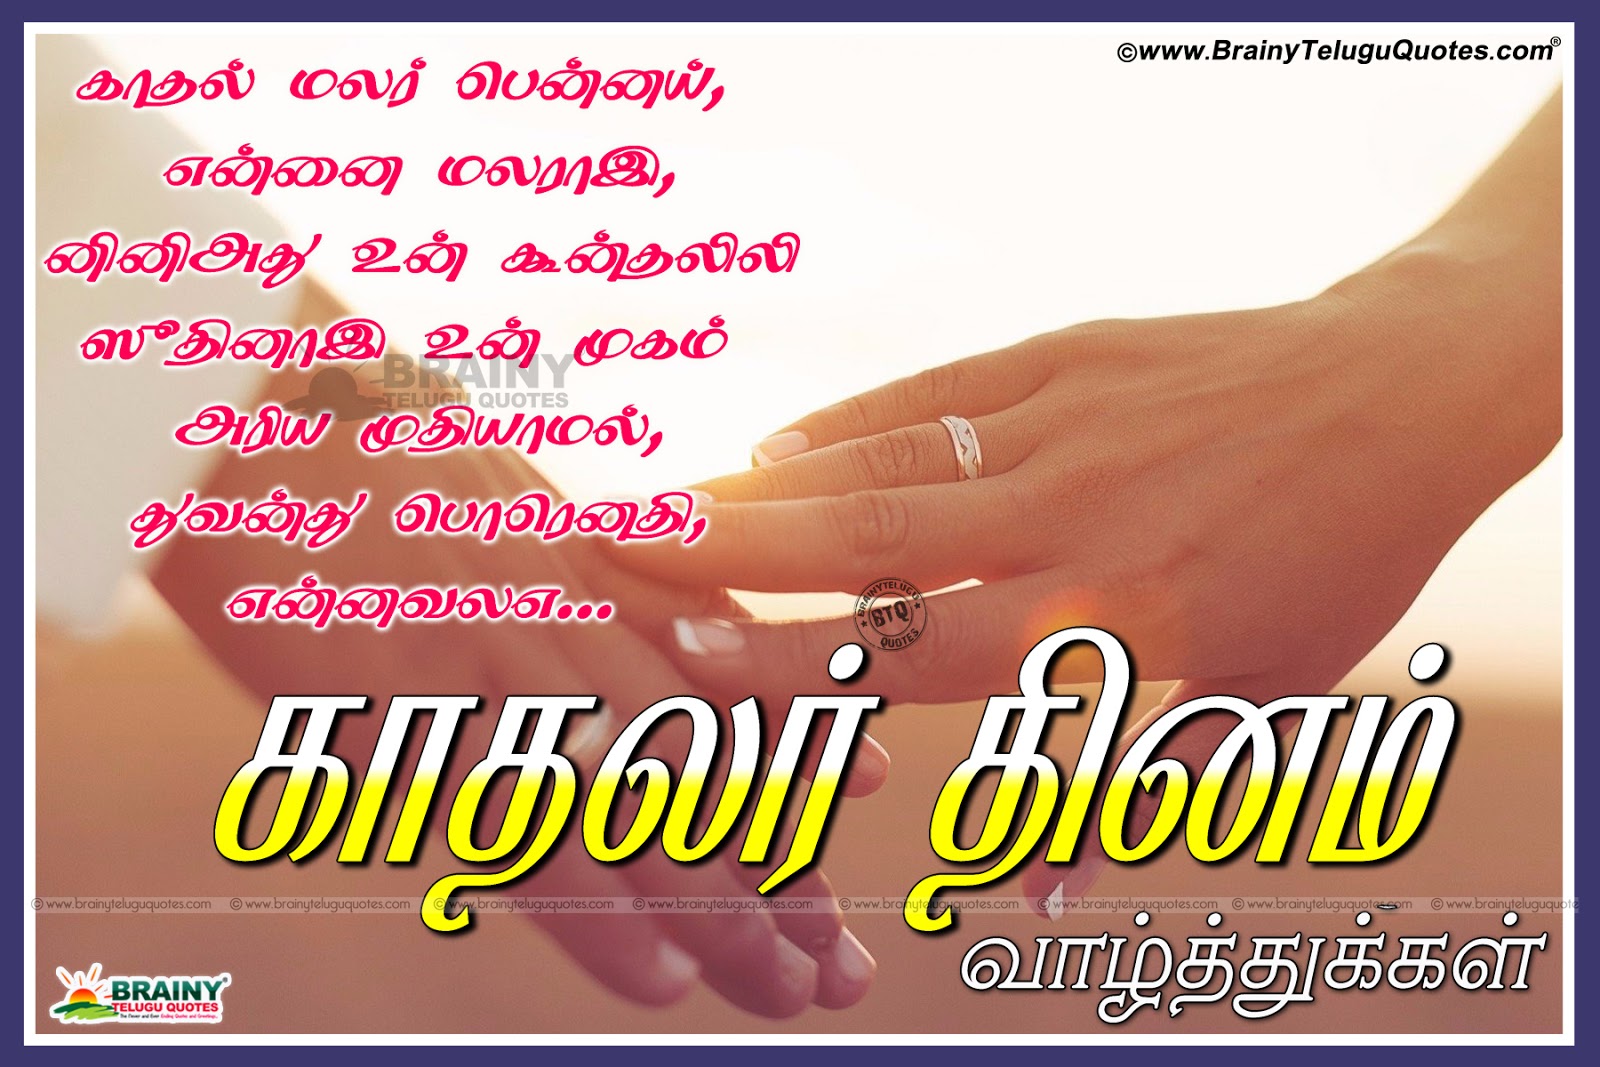 Tamil Lovers Day / Valentines Day Tamil Poems Quotations KavithaiTamil